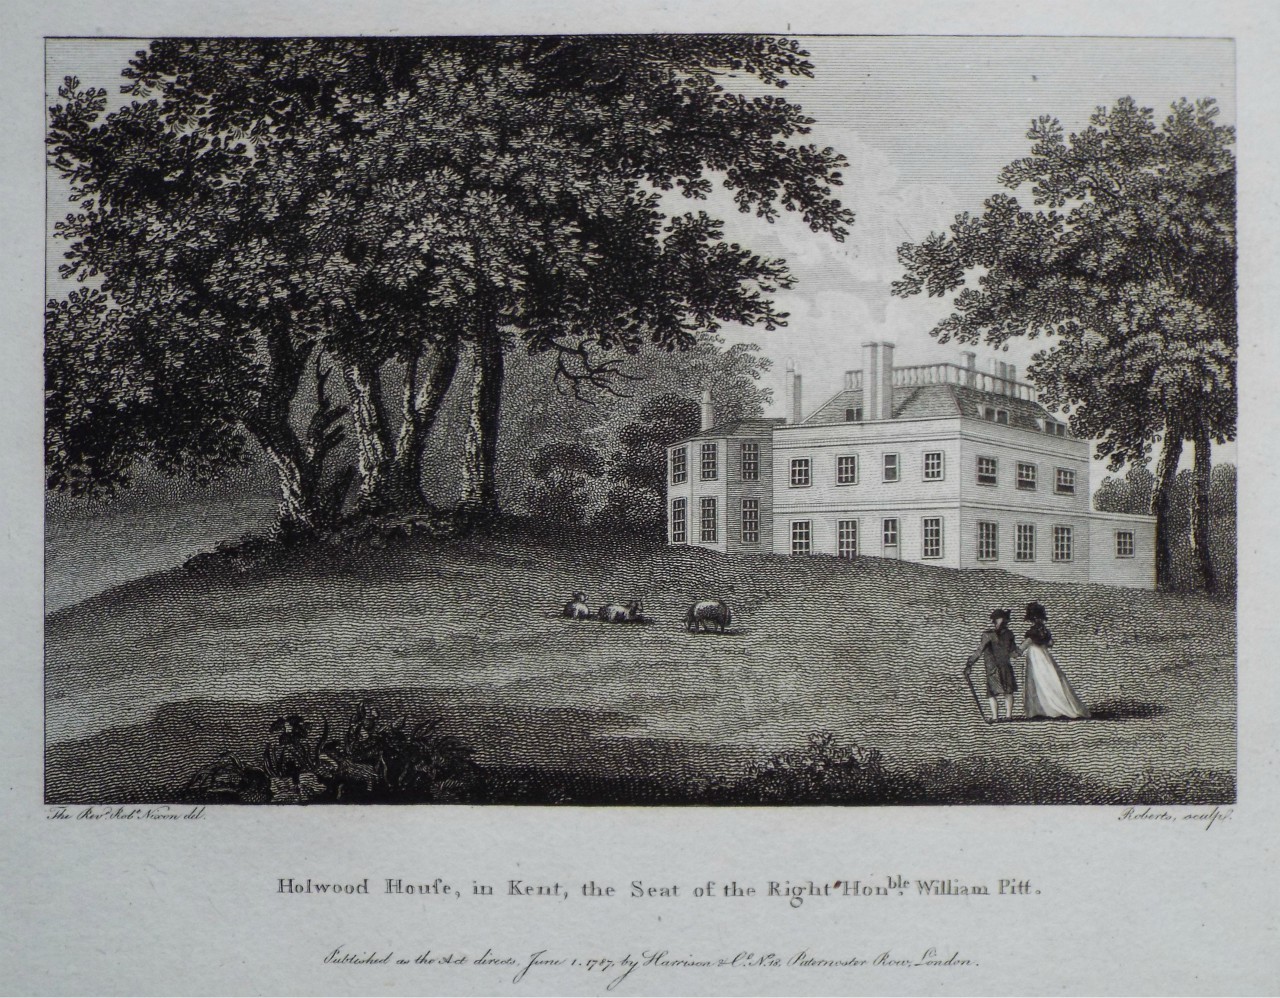 Print - Holwood House, in Kent, the Seat of the Right Honble. William Pitt. - 